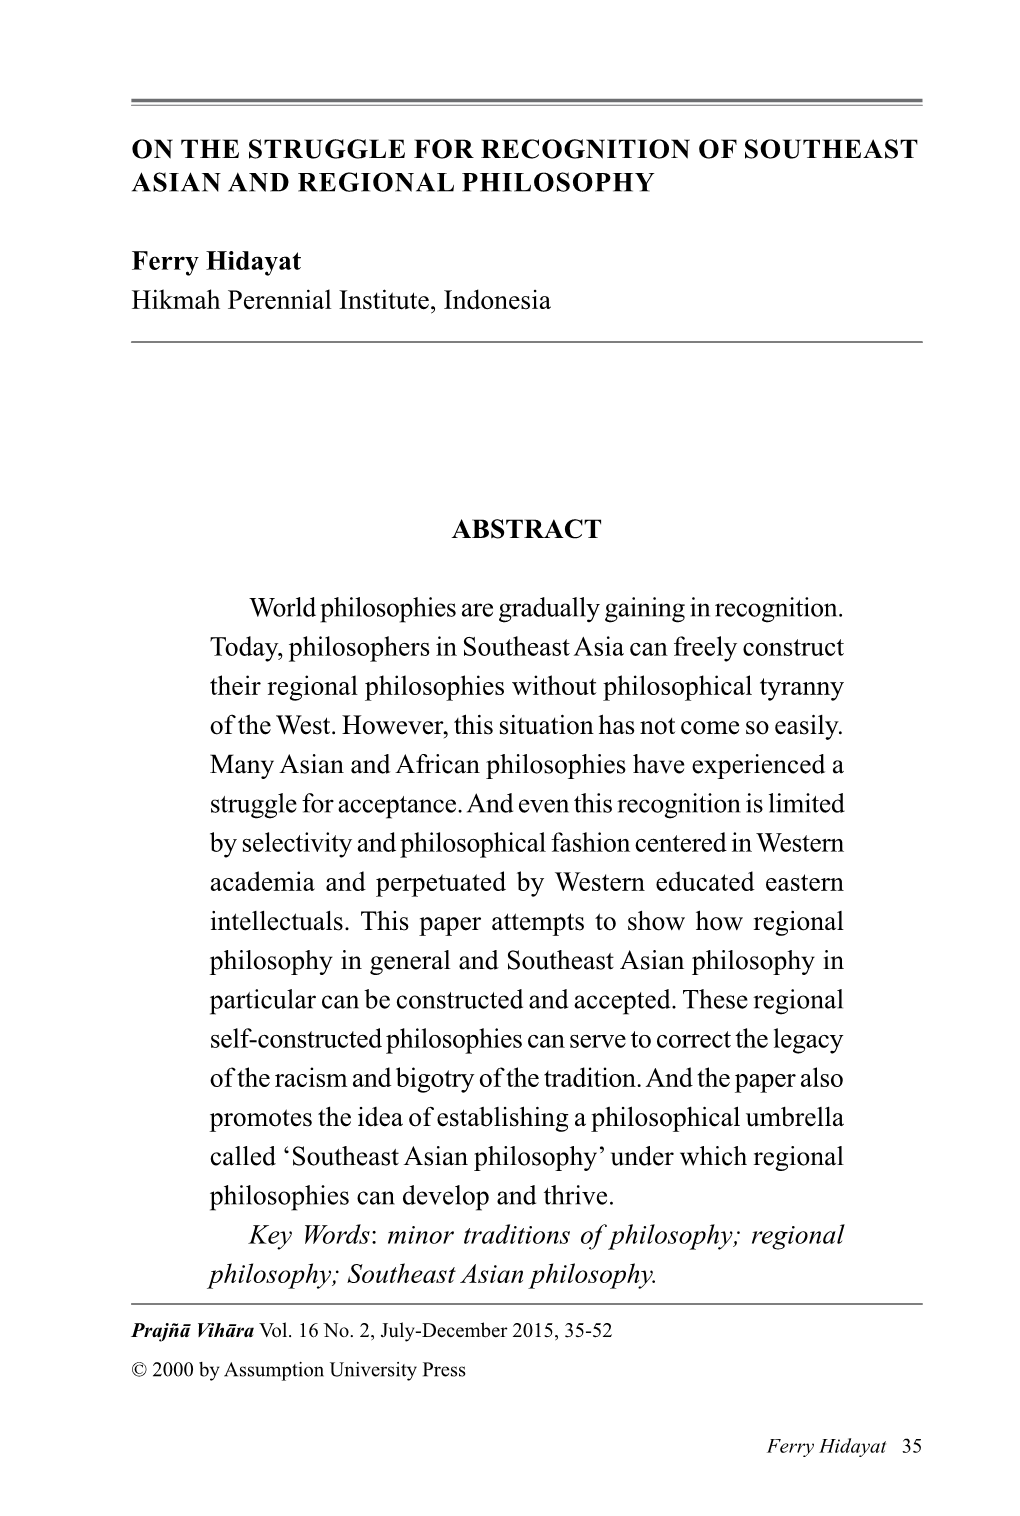 On the Struggle for Recognition of Southeast Asian and Regional Philosophy